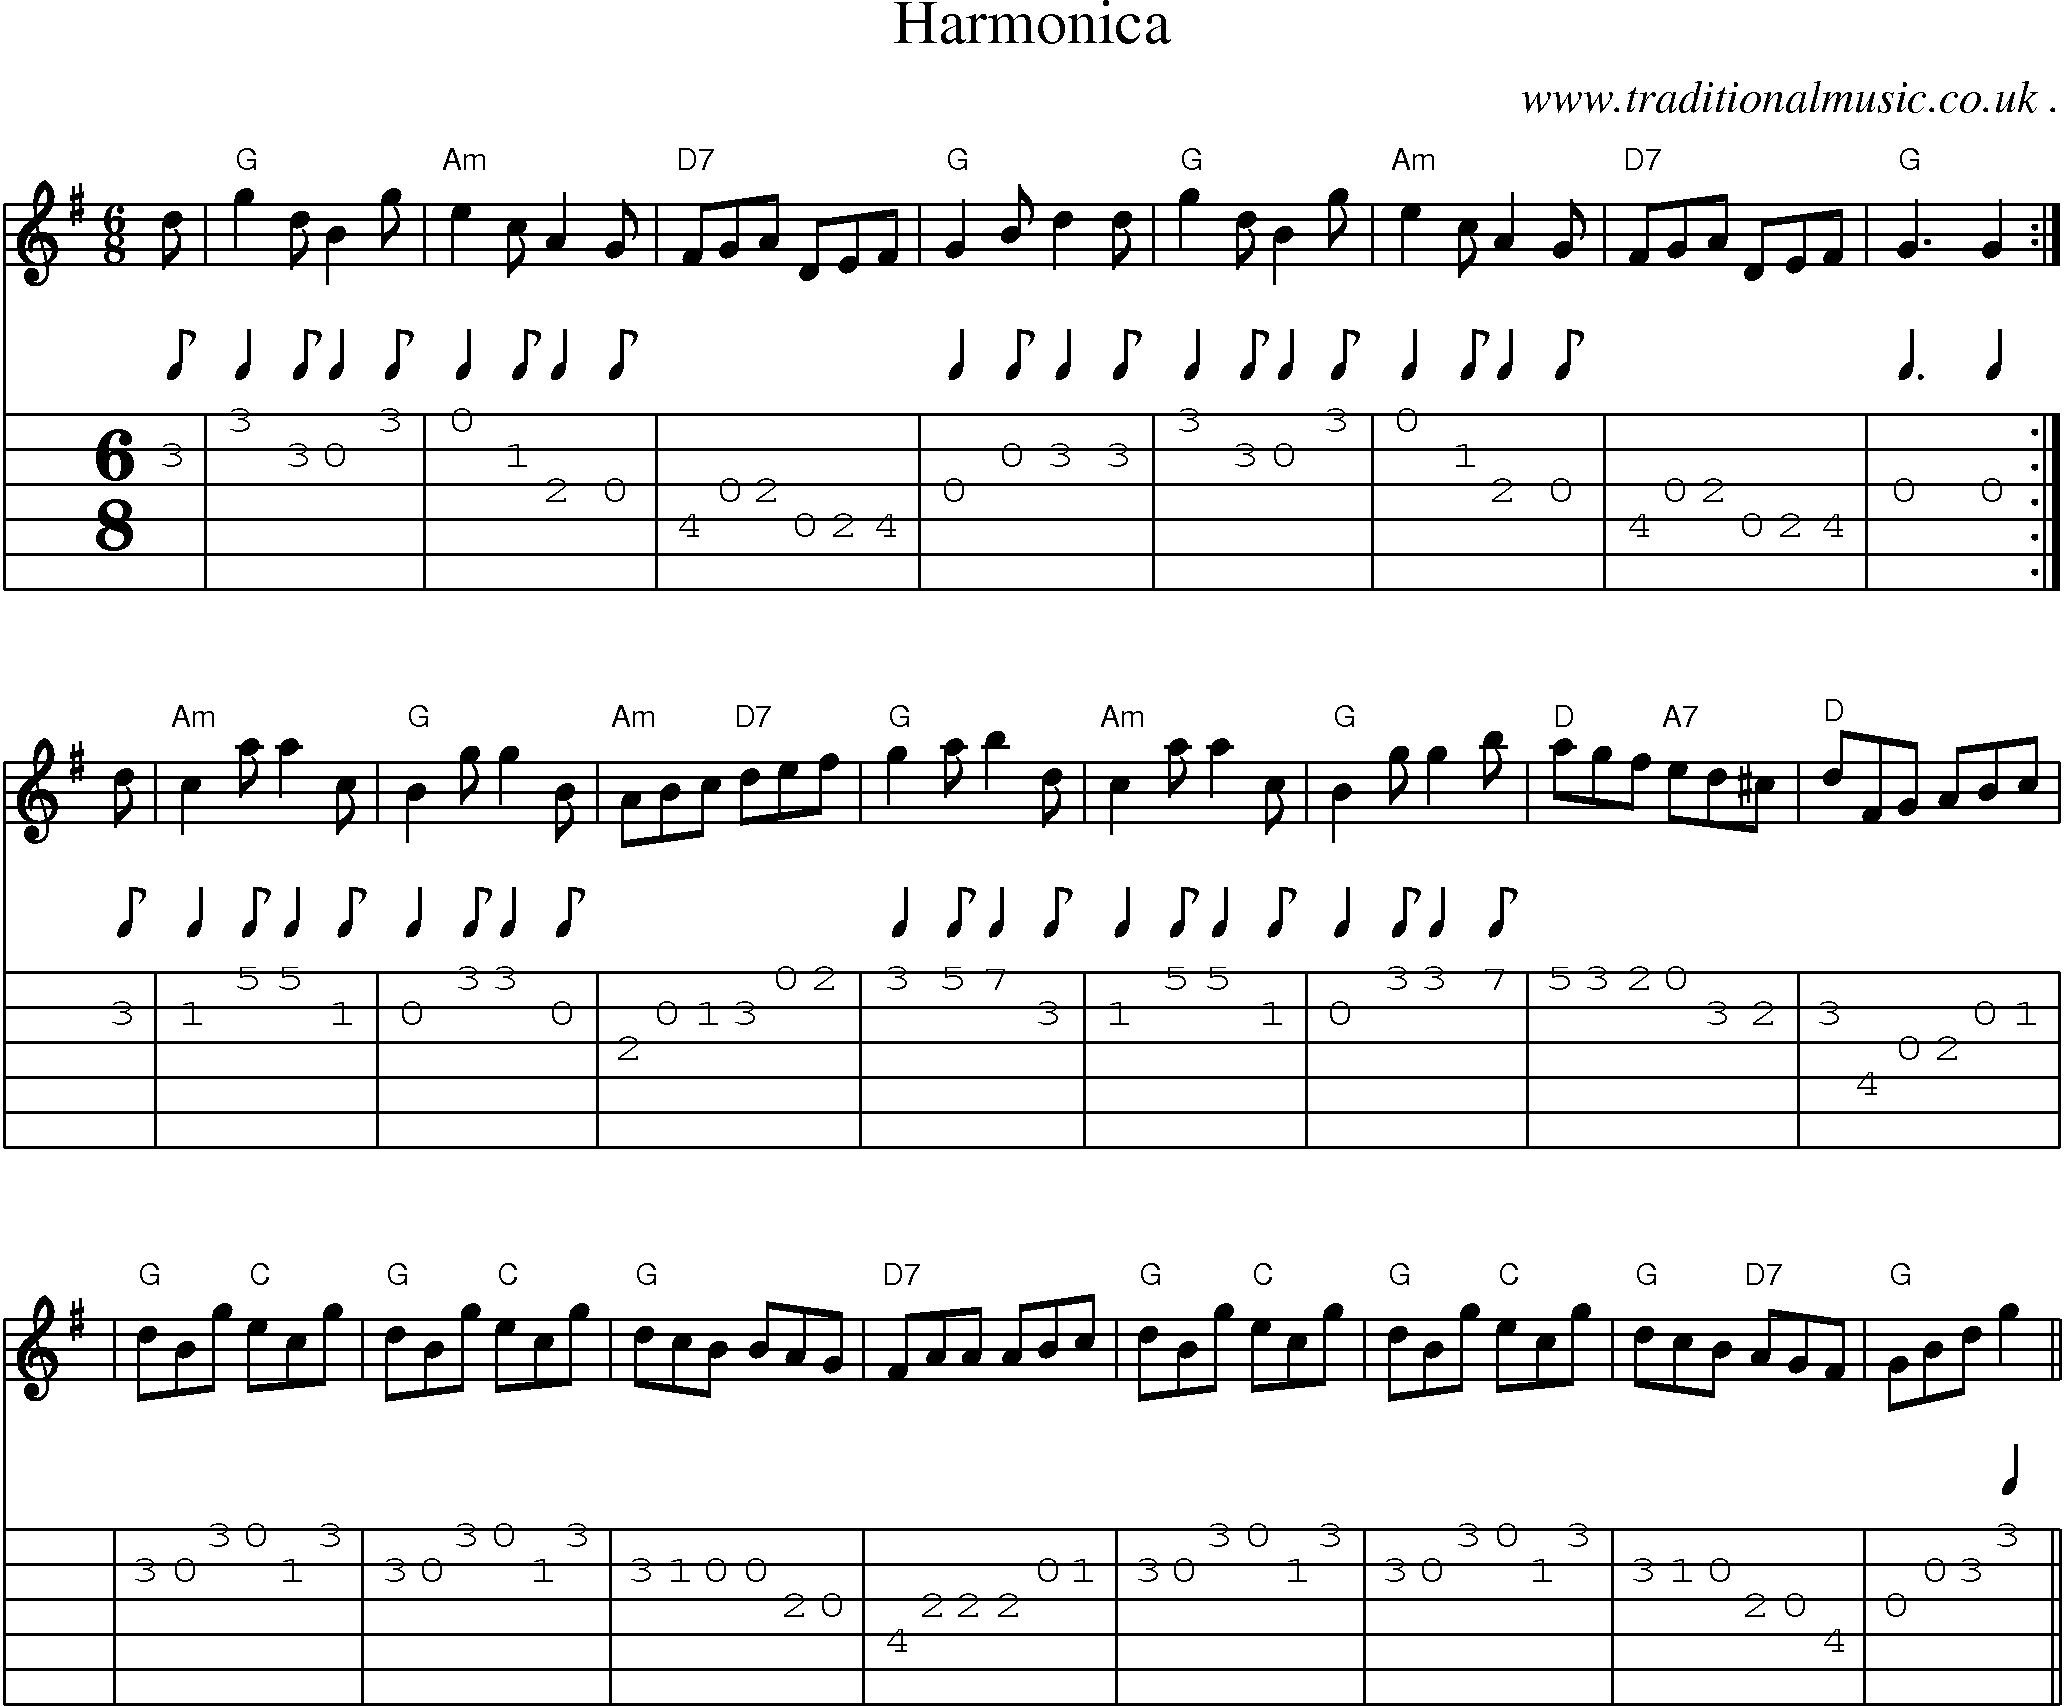 Sheet-music  score, Chords and Guitar Tabs for Harmonica